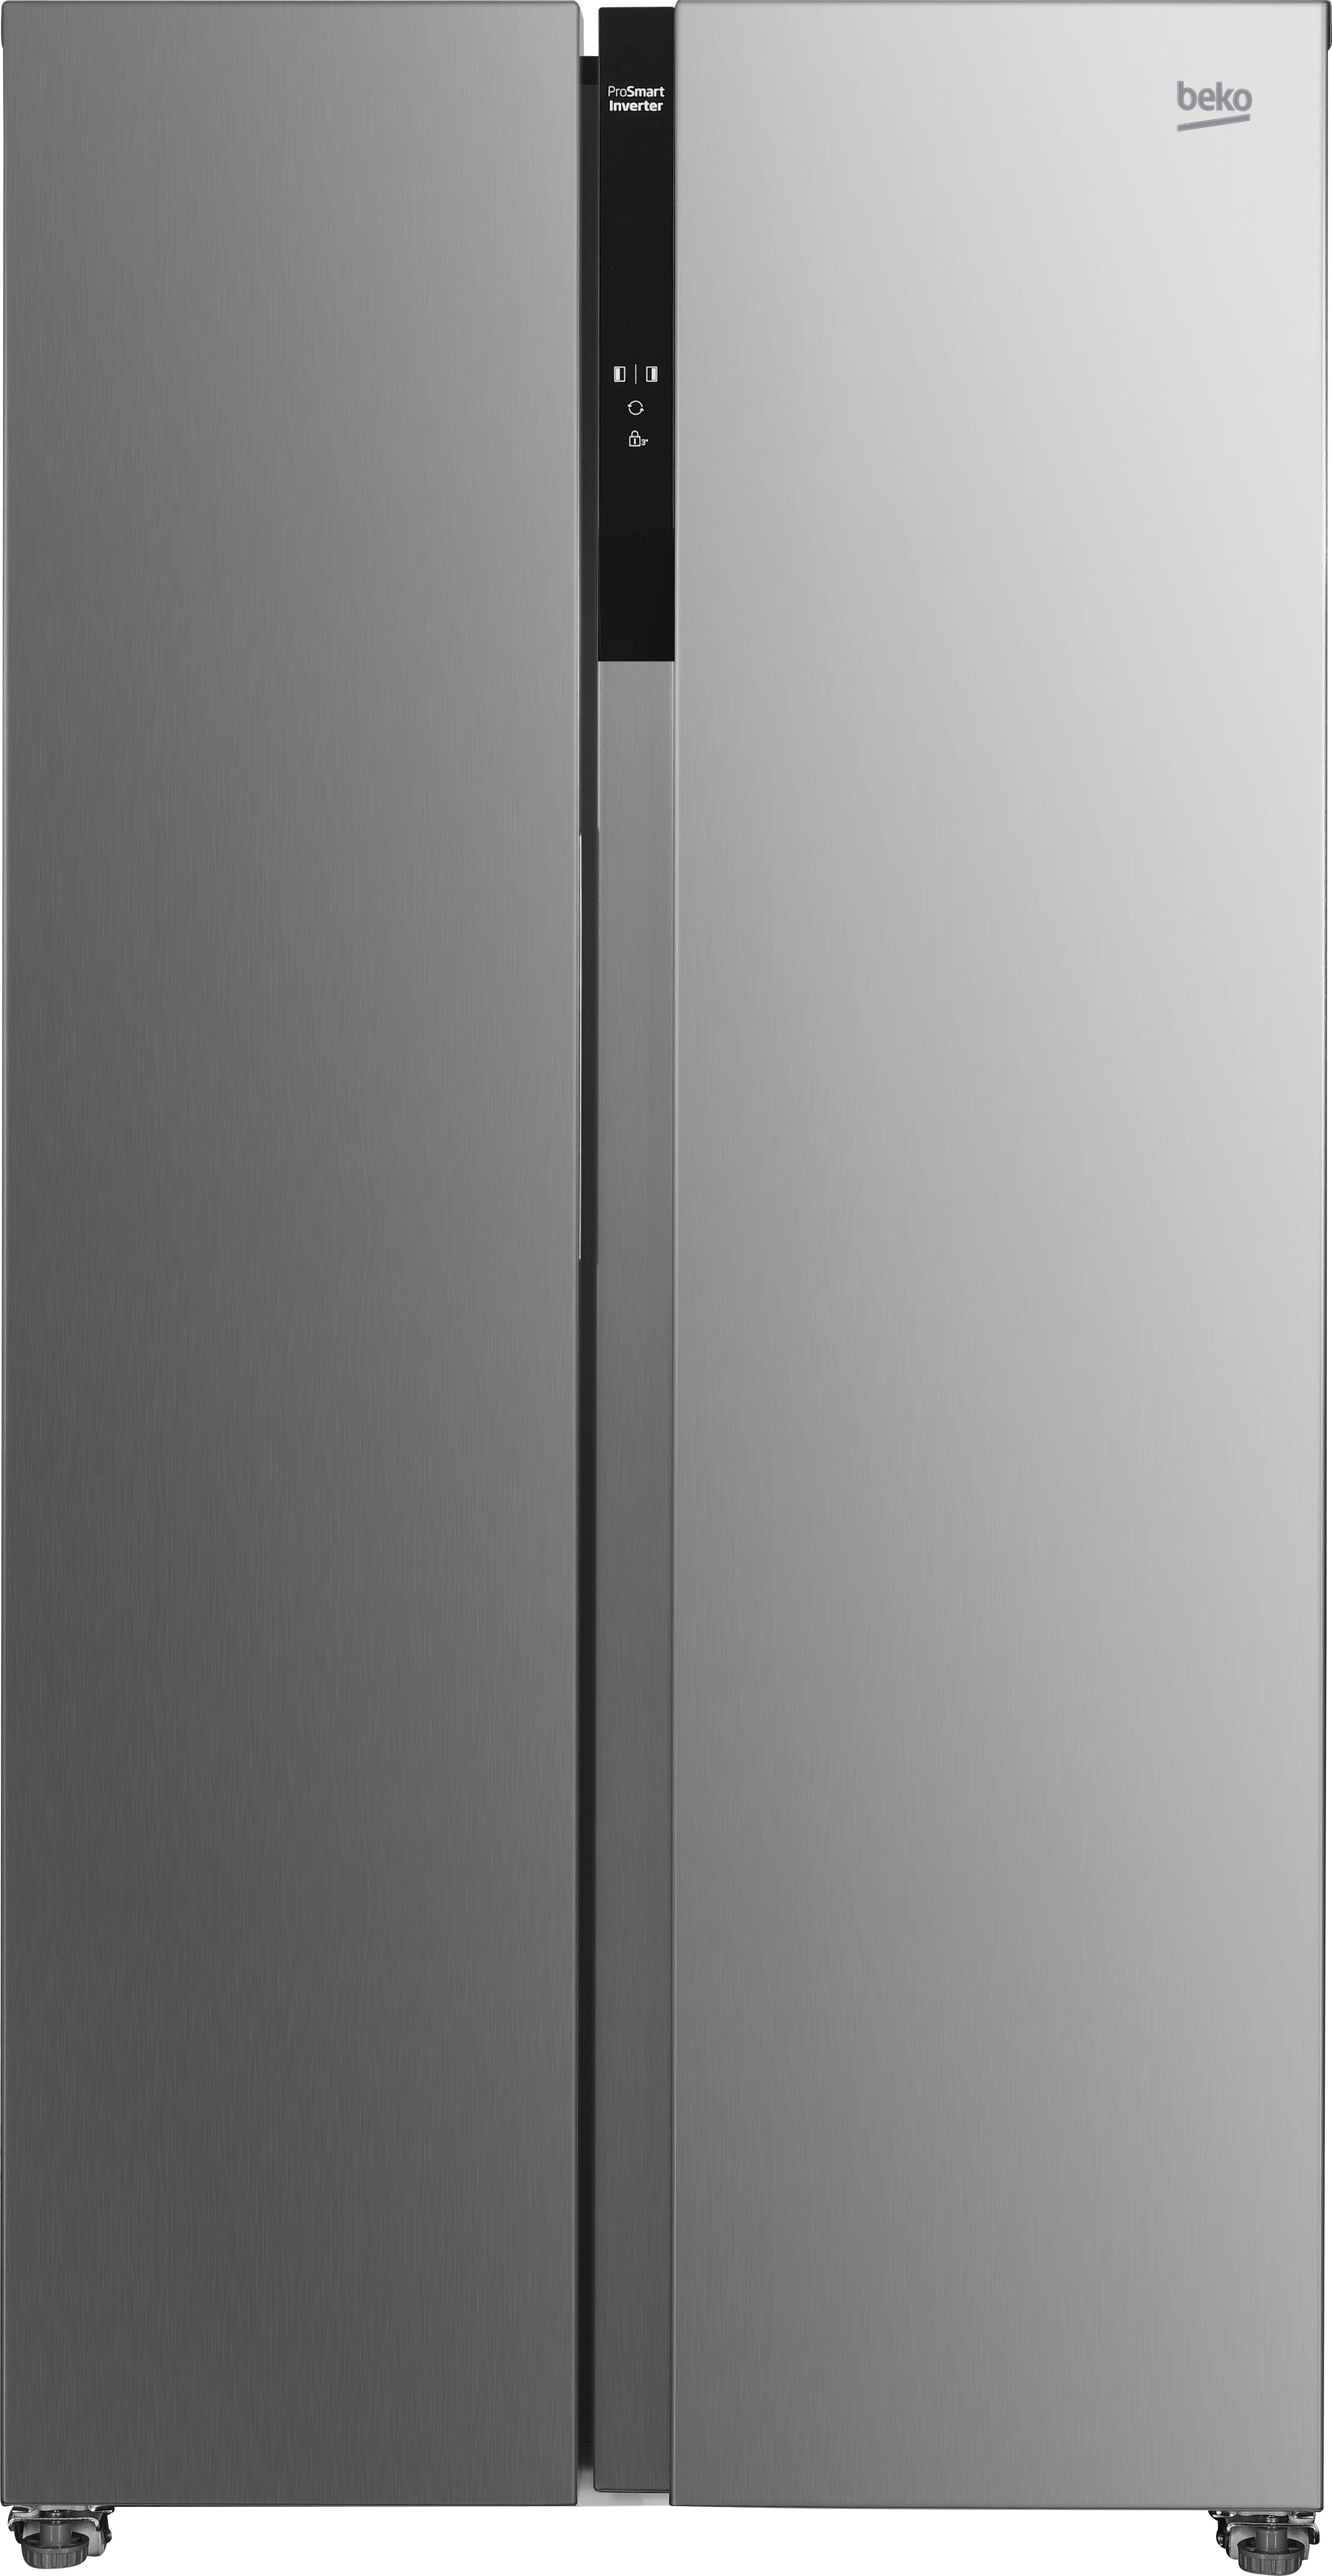 Beko ASL1532PX Frost Free American Fridge Freezer - Brushed Steel - D Rated, Stainless Steel